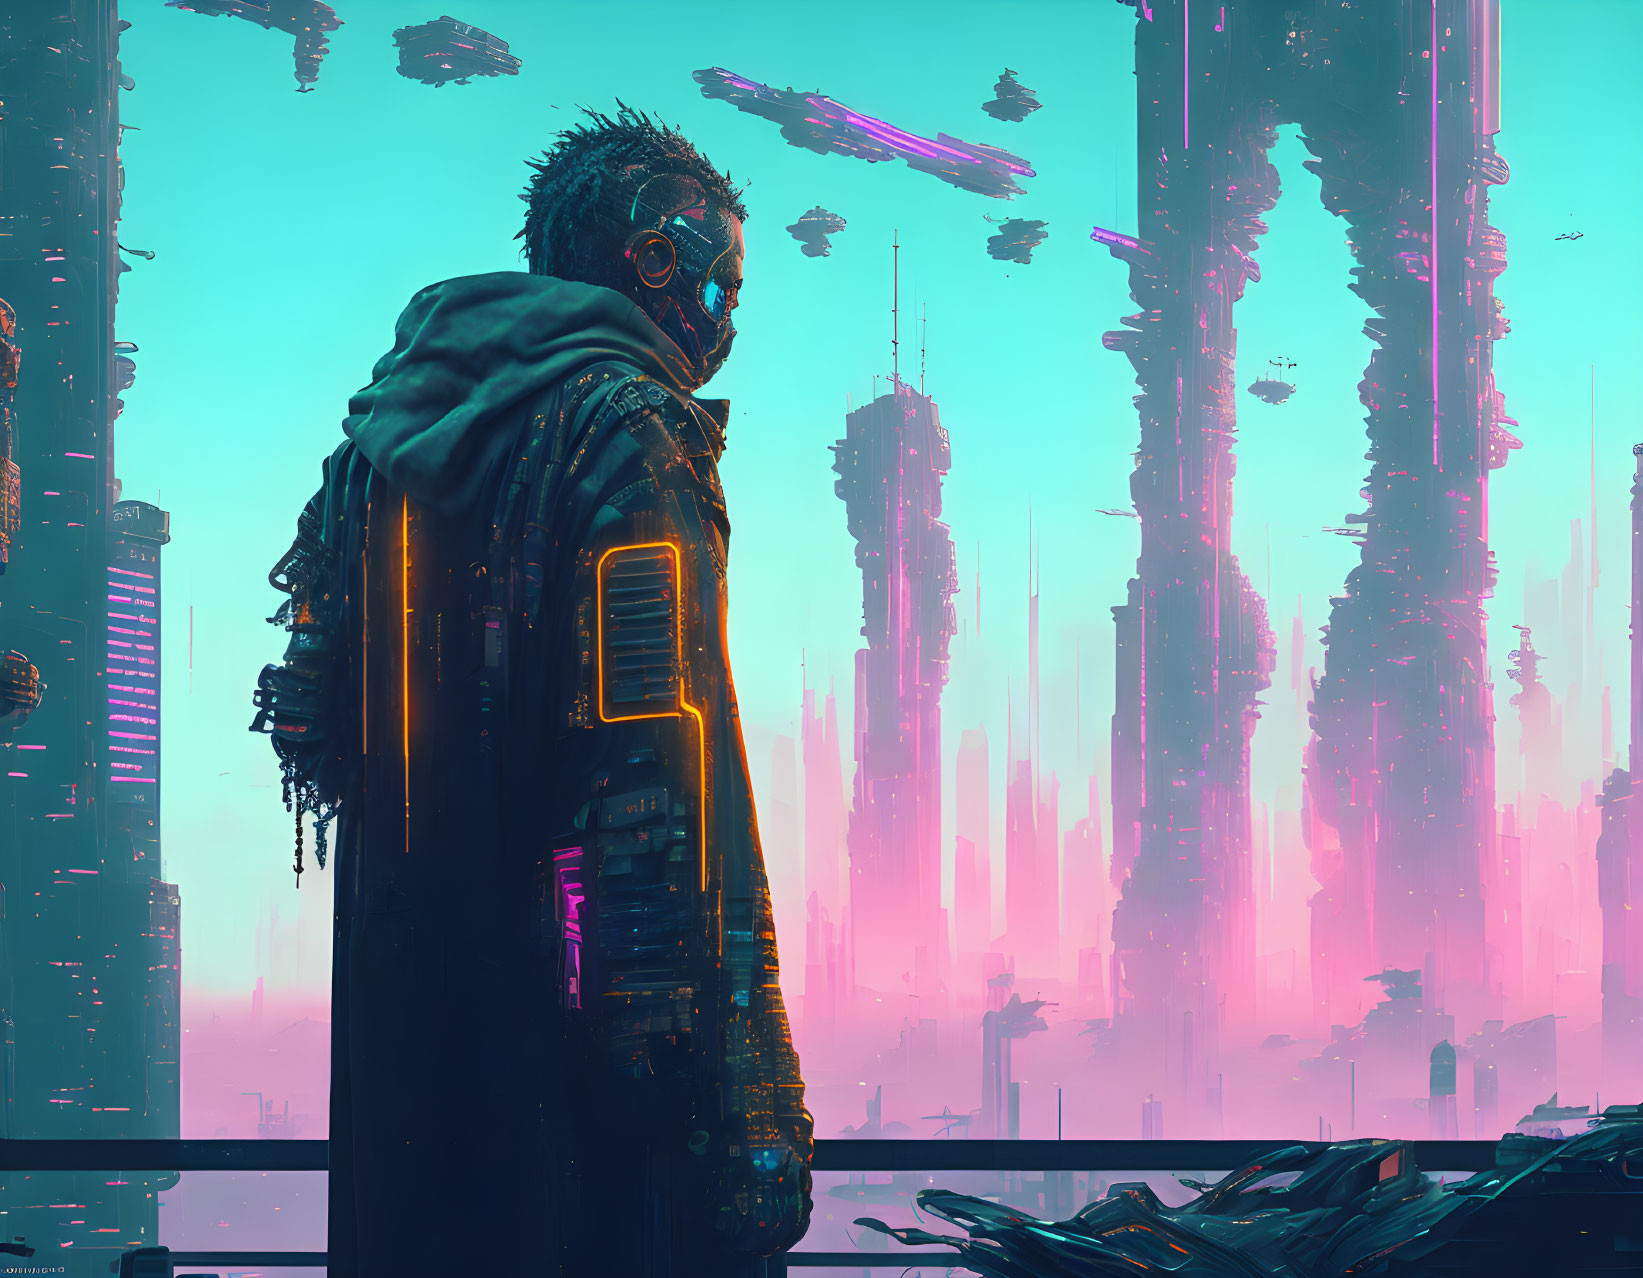 Futuristic armor wearer gazes at cityscape under pink and blue sky